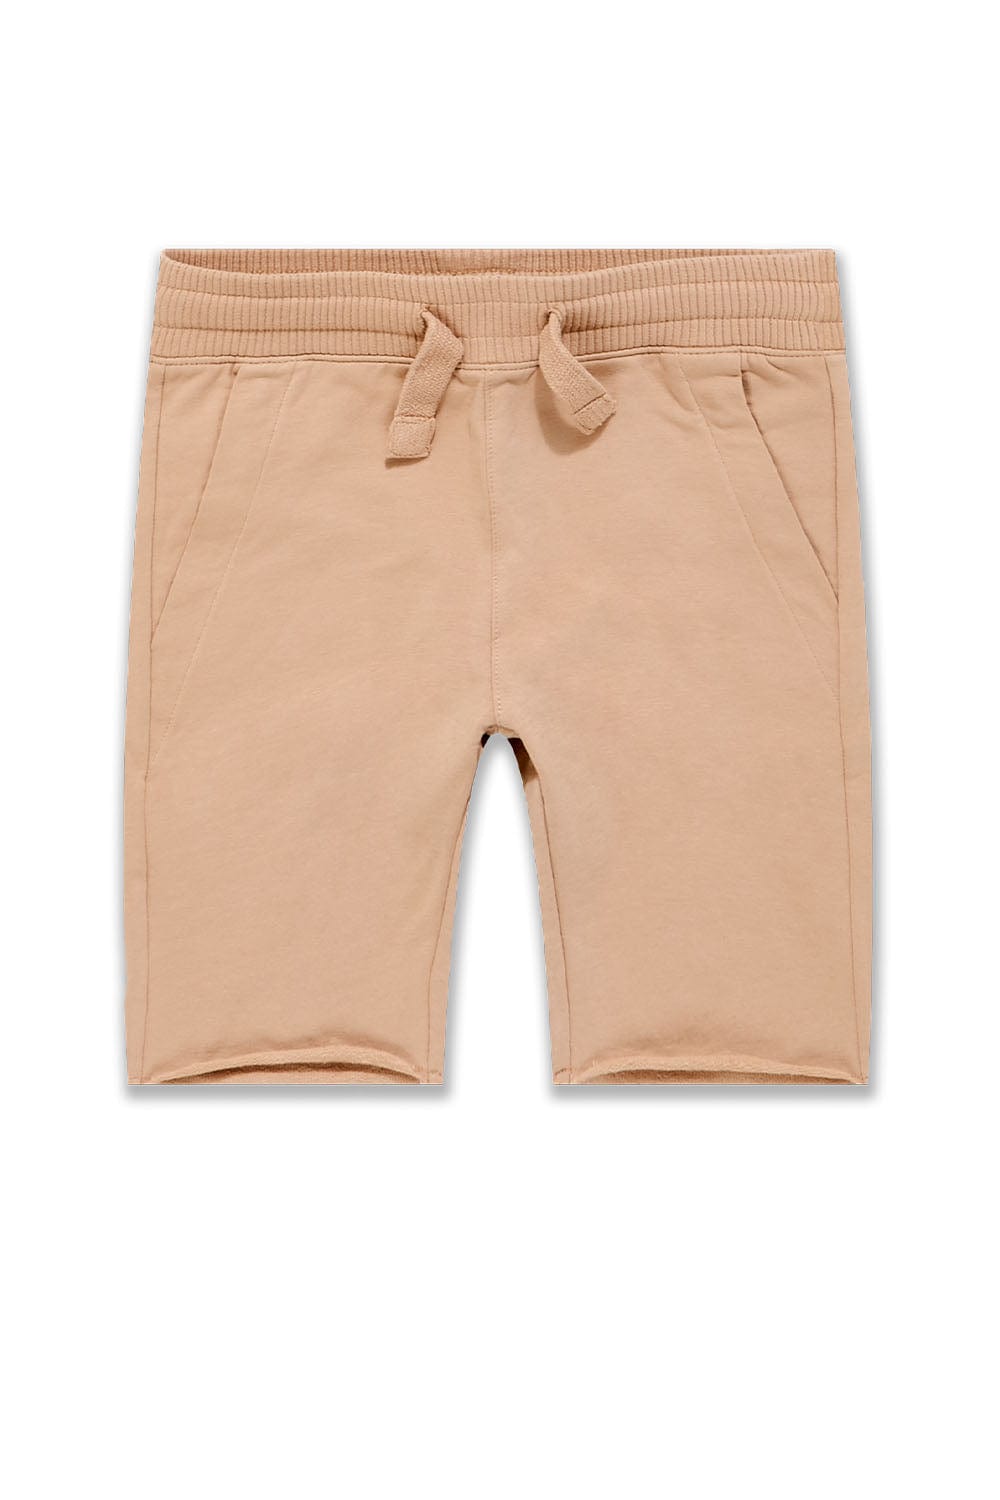 JC Kids Kids Palma French Terry Shorts (Exclusive Colors) Clay / 2